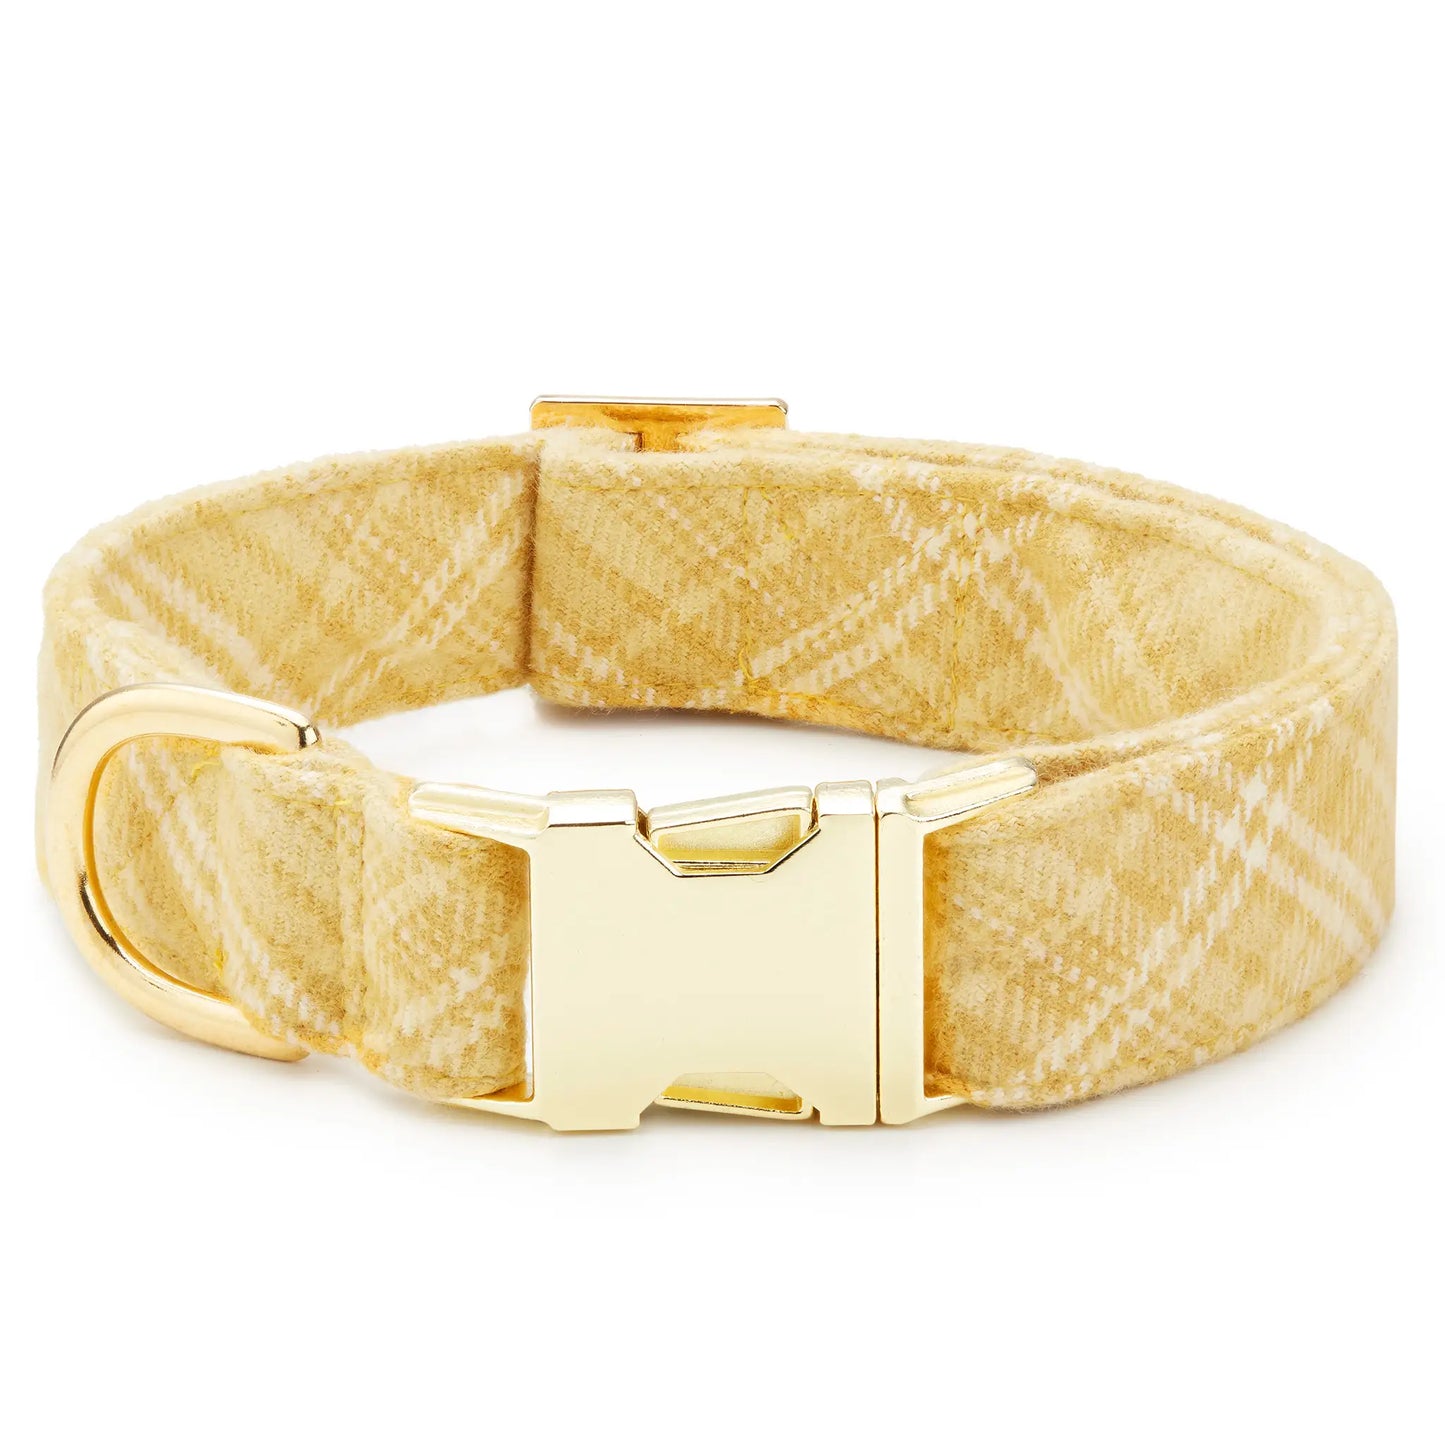 Buttercup Plaid Flannel Dog Collar